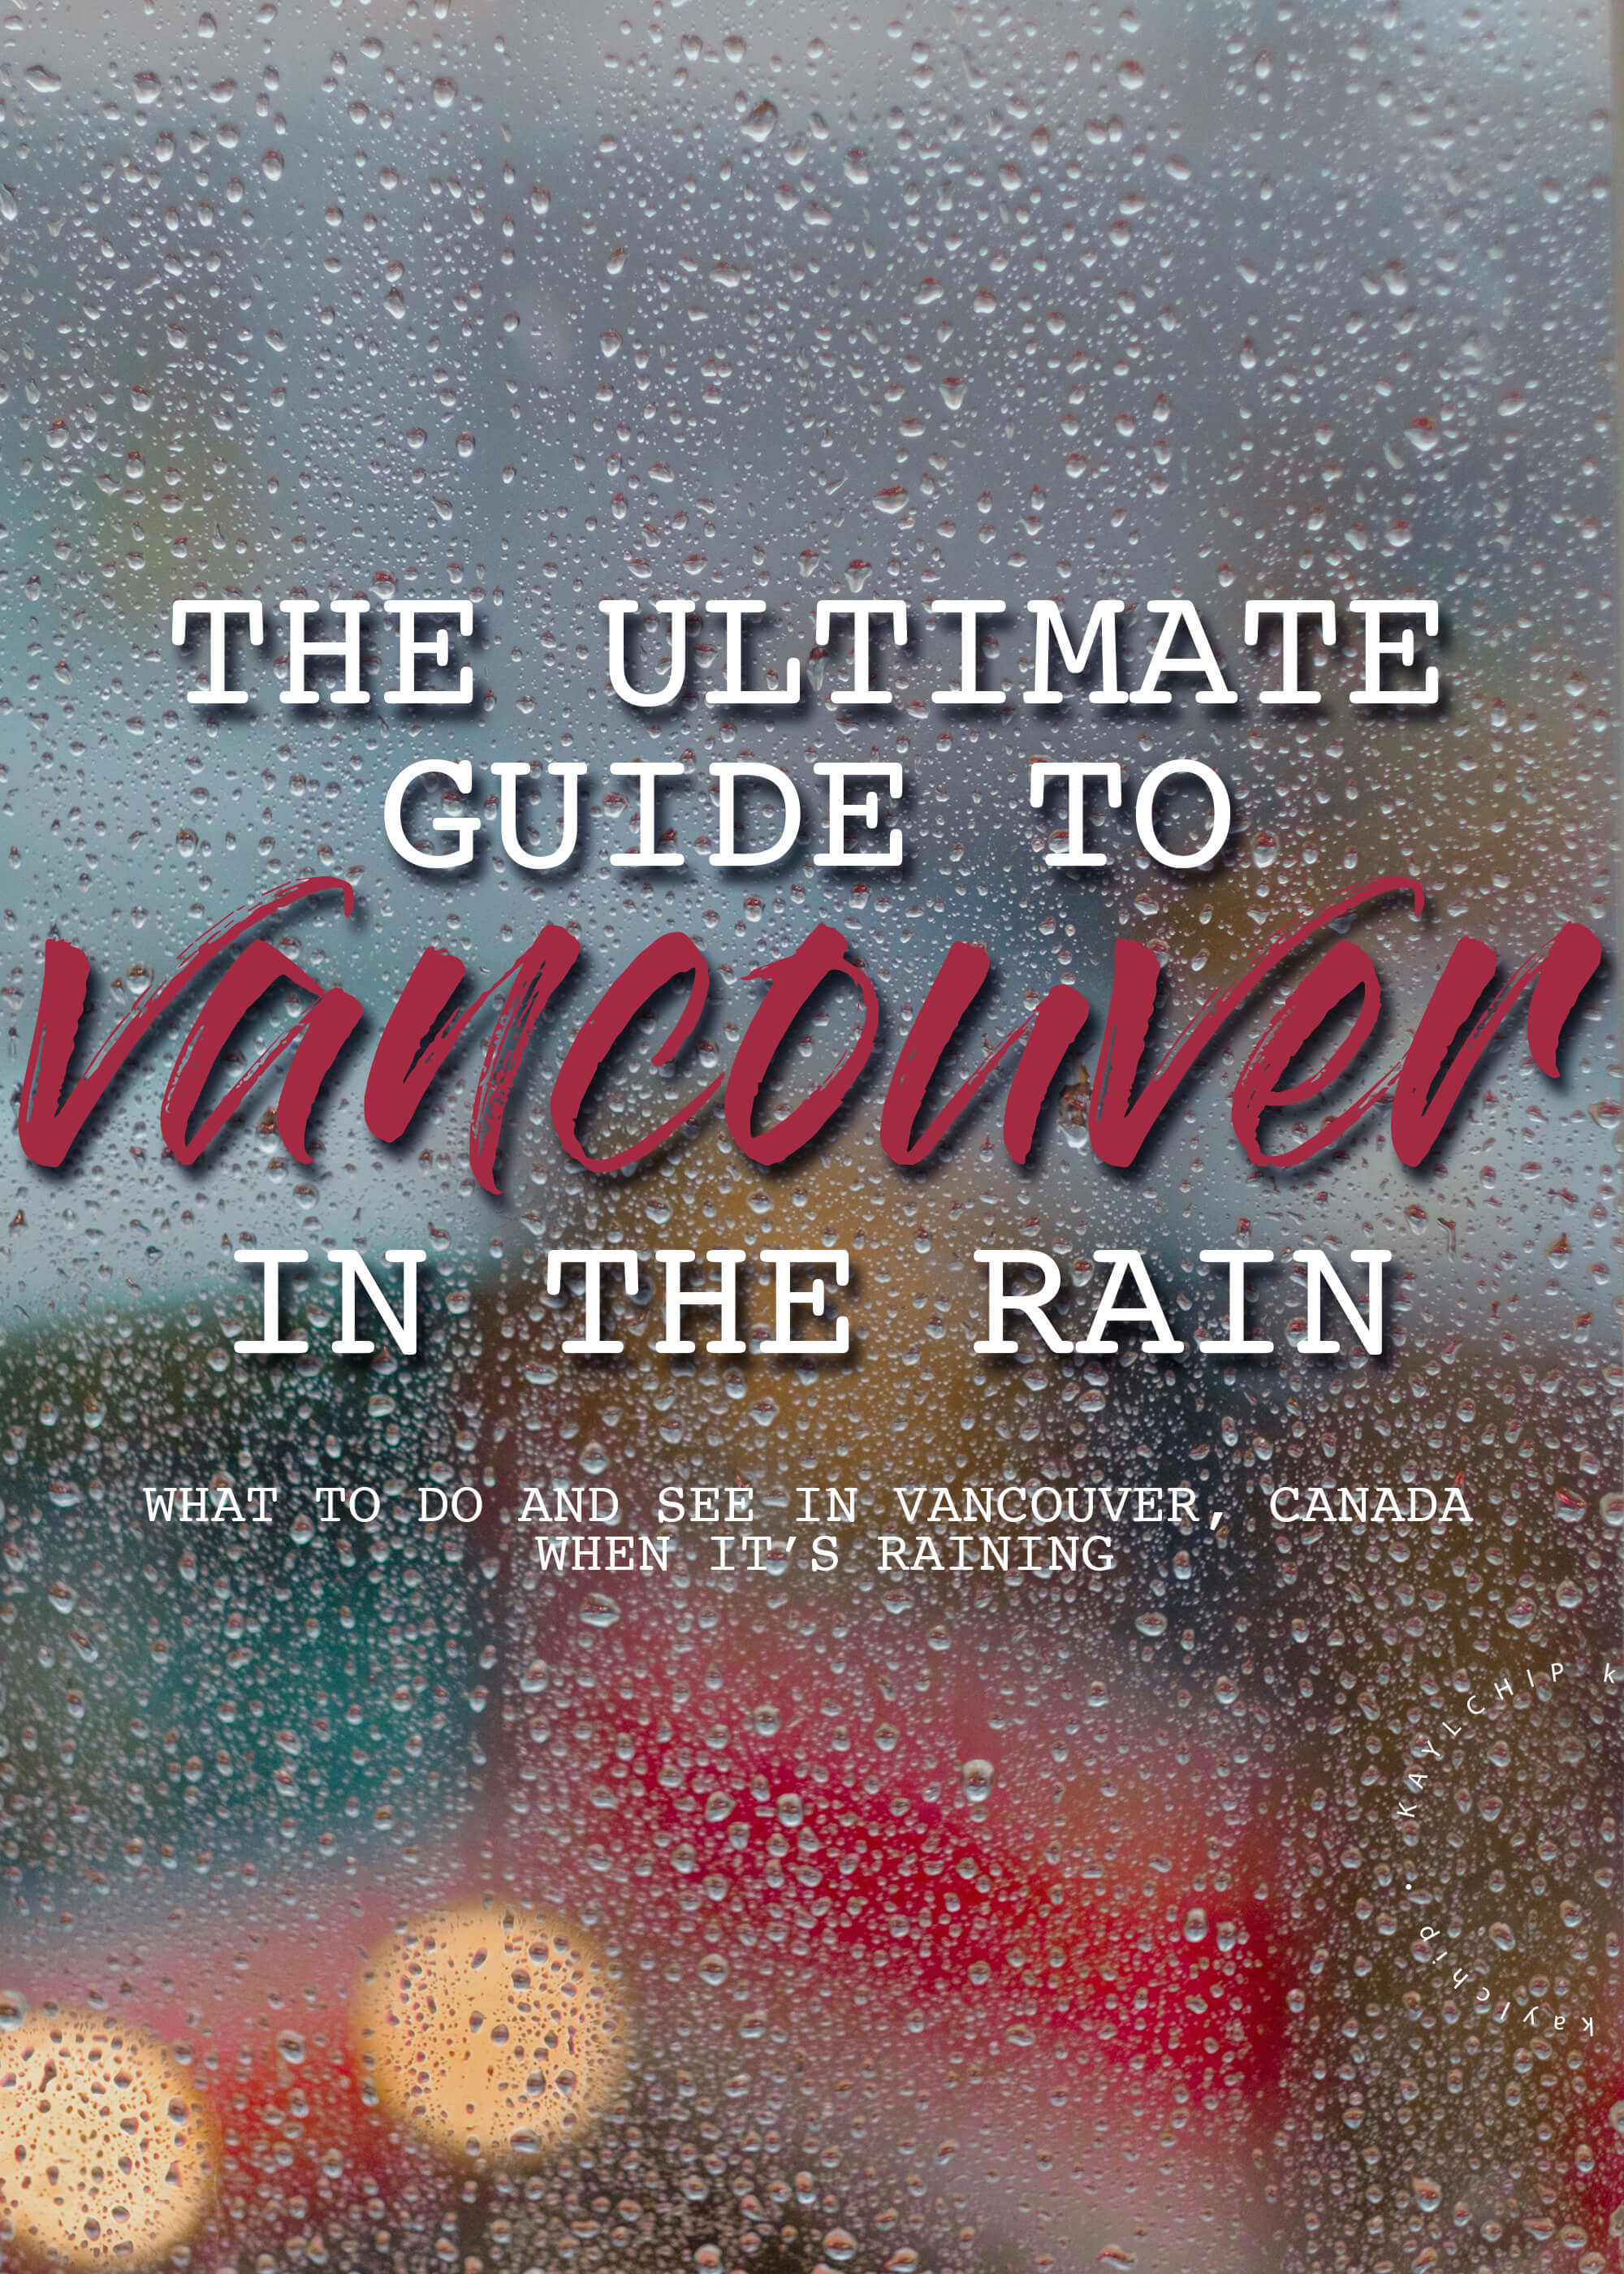 Ultimate Guide to Vancouver in The Rain